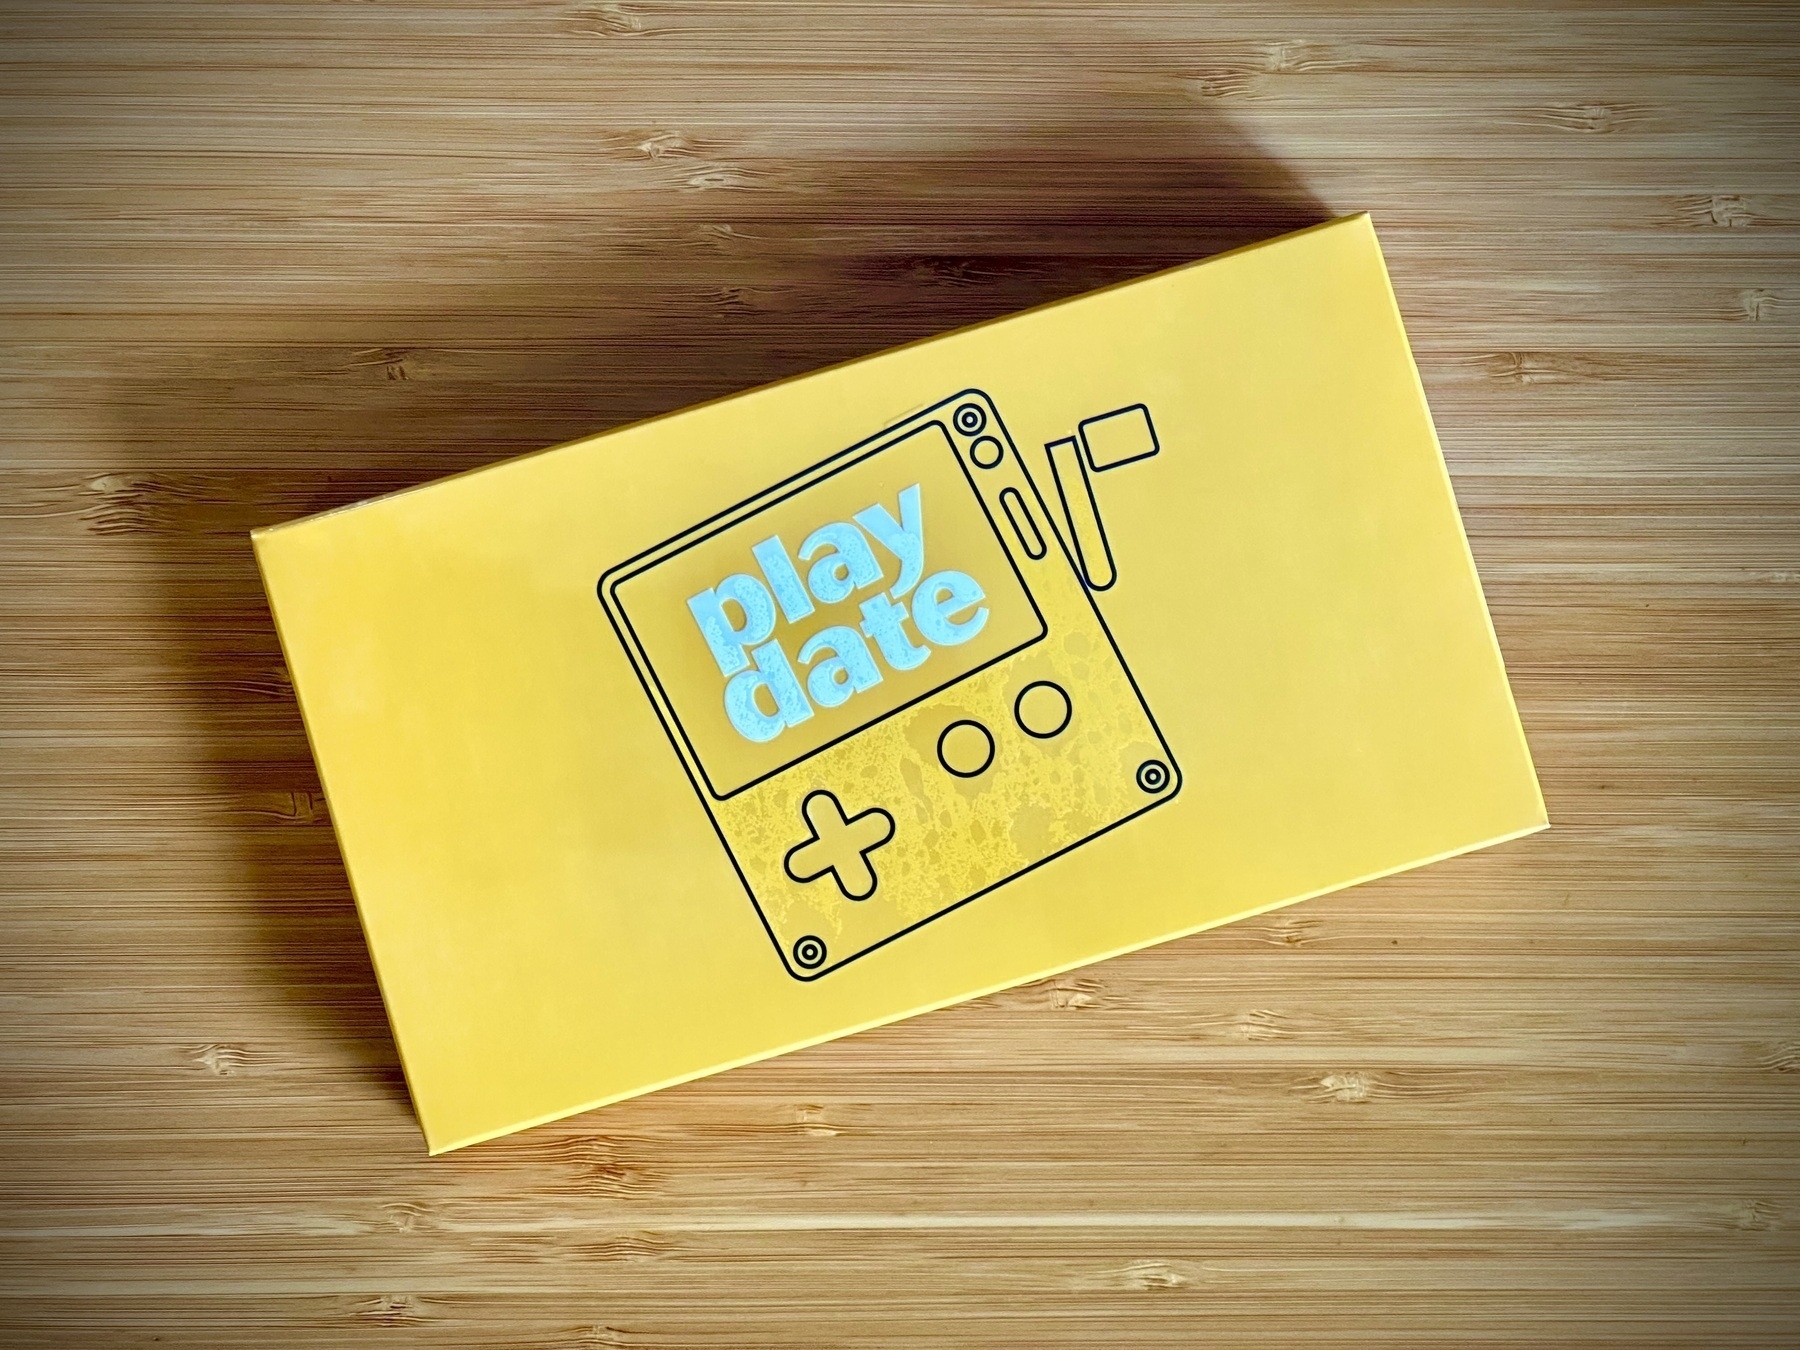 A closeup of a bright yellow boxed Playdate games console on a bamboo desk.